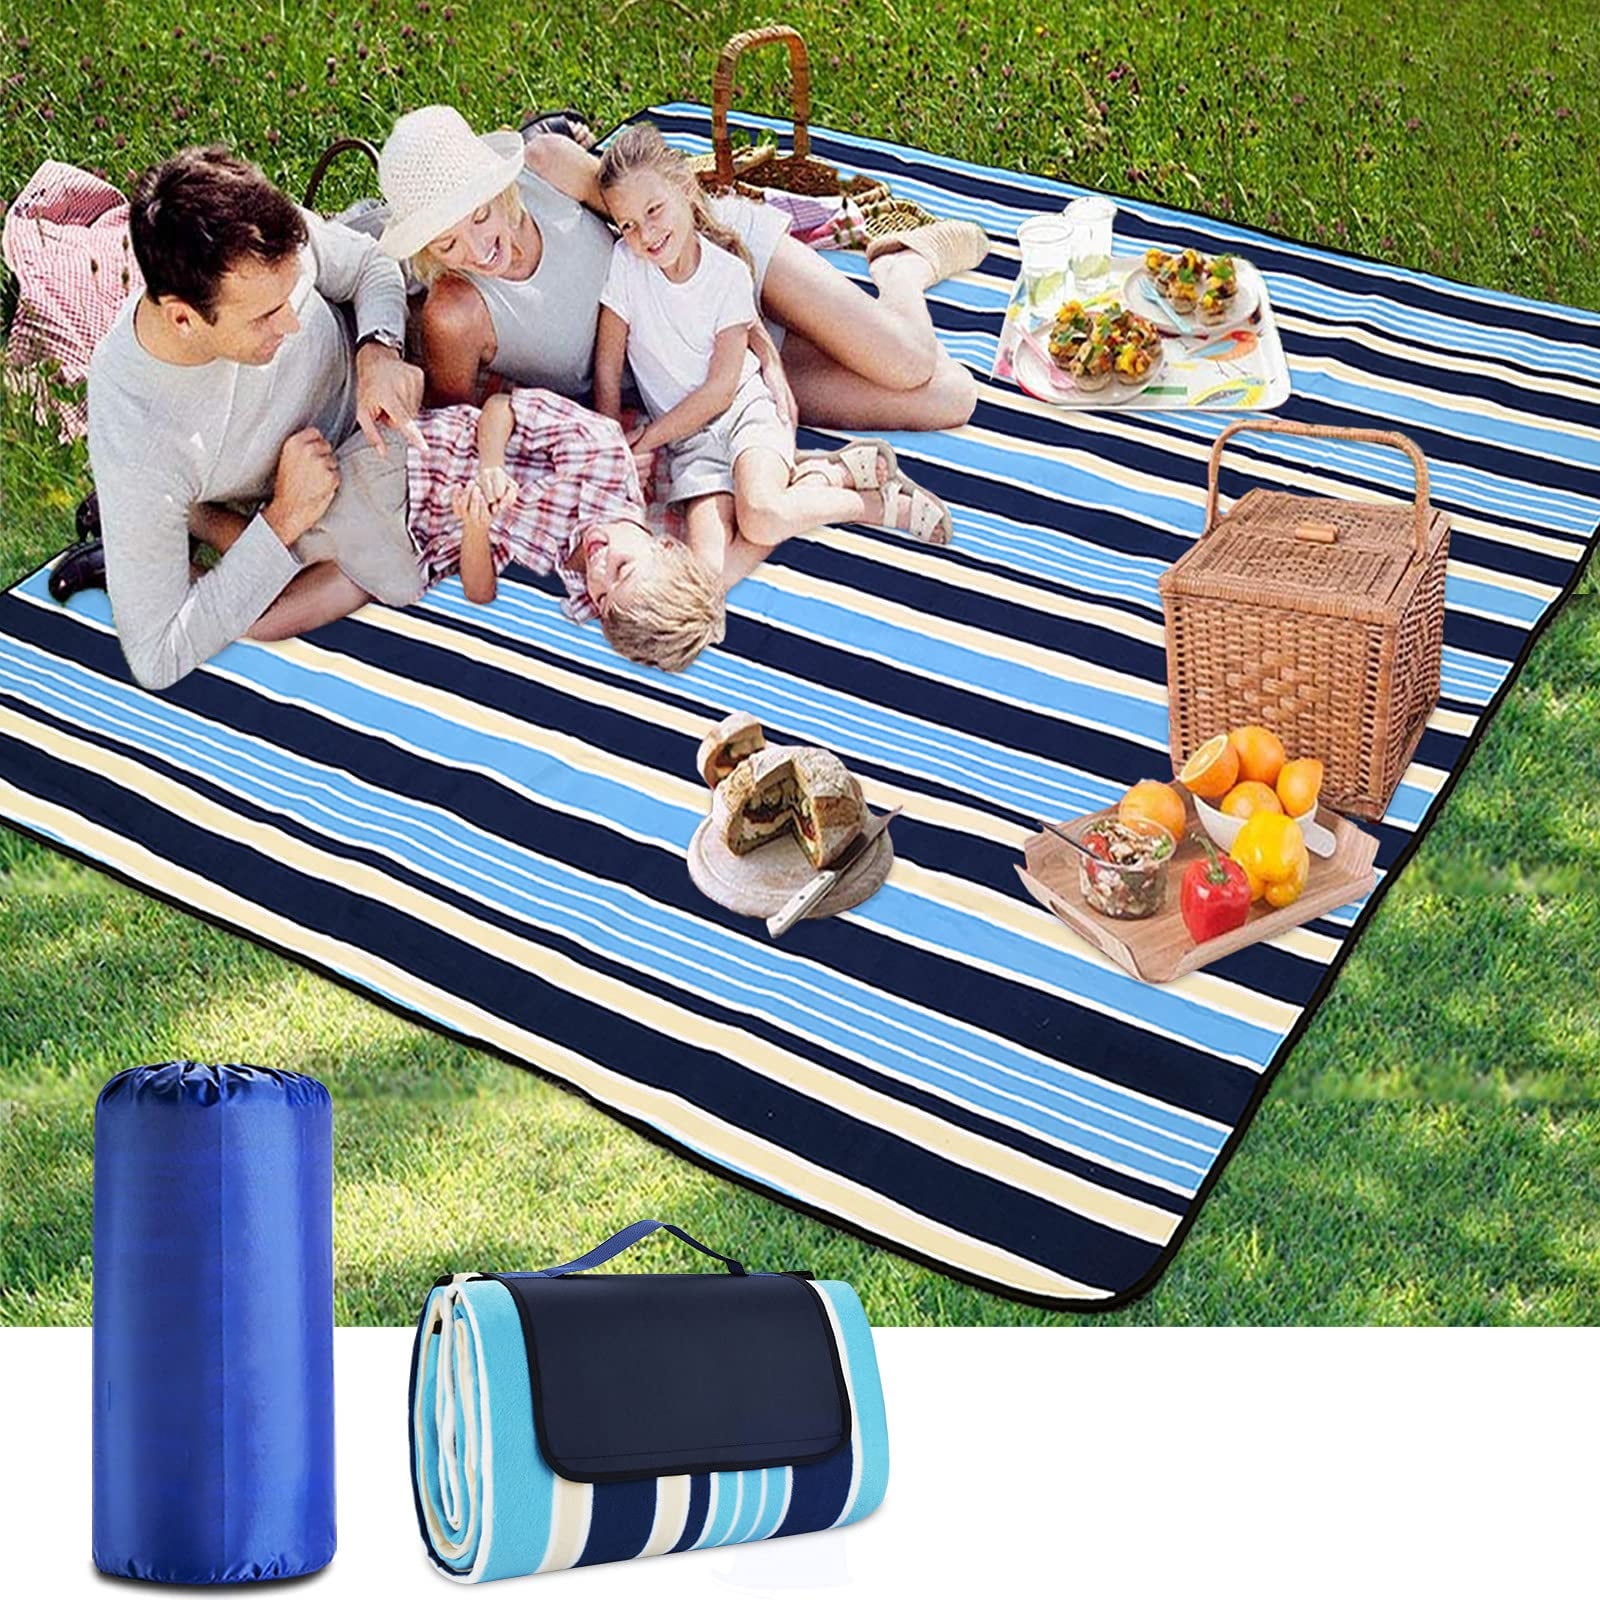 TSWEETHOME African Women Round Picnic Outdoor Camping Beach Blanket Mat with Waterproof SandProof for Camping,Park,Beach,Hiking Family Concerts 58“